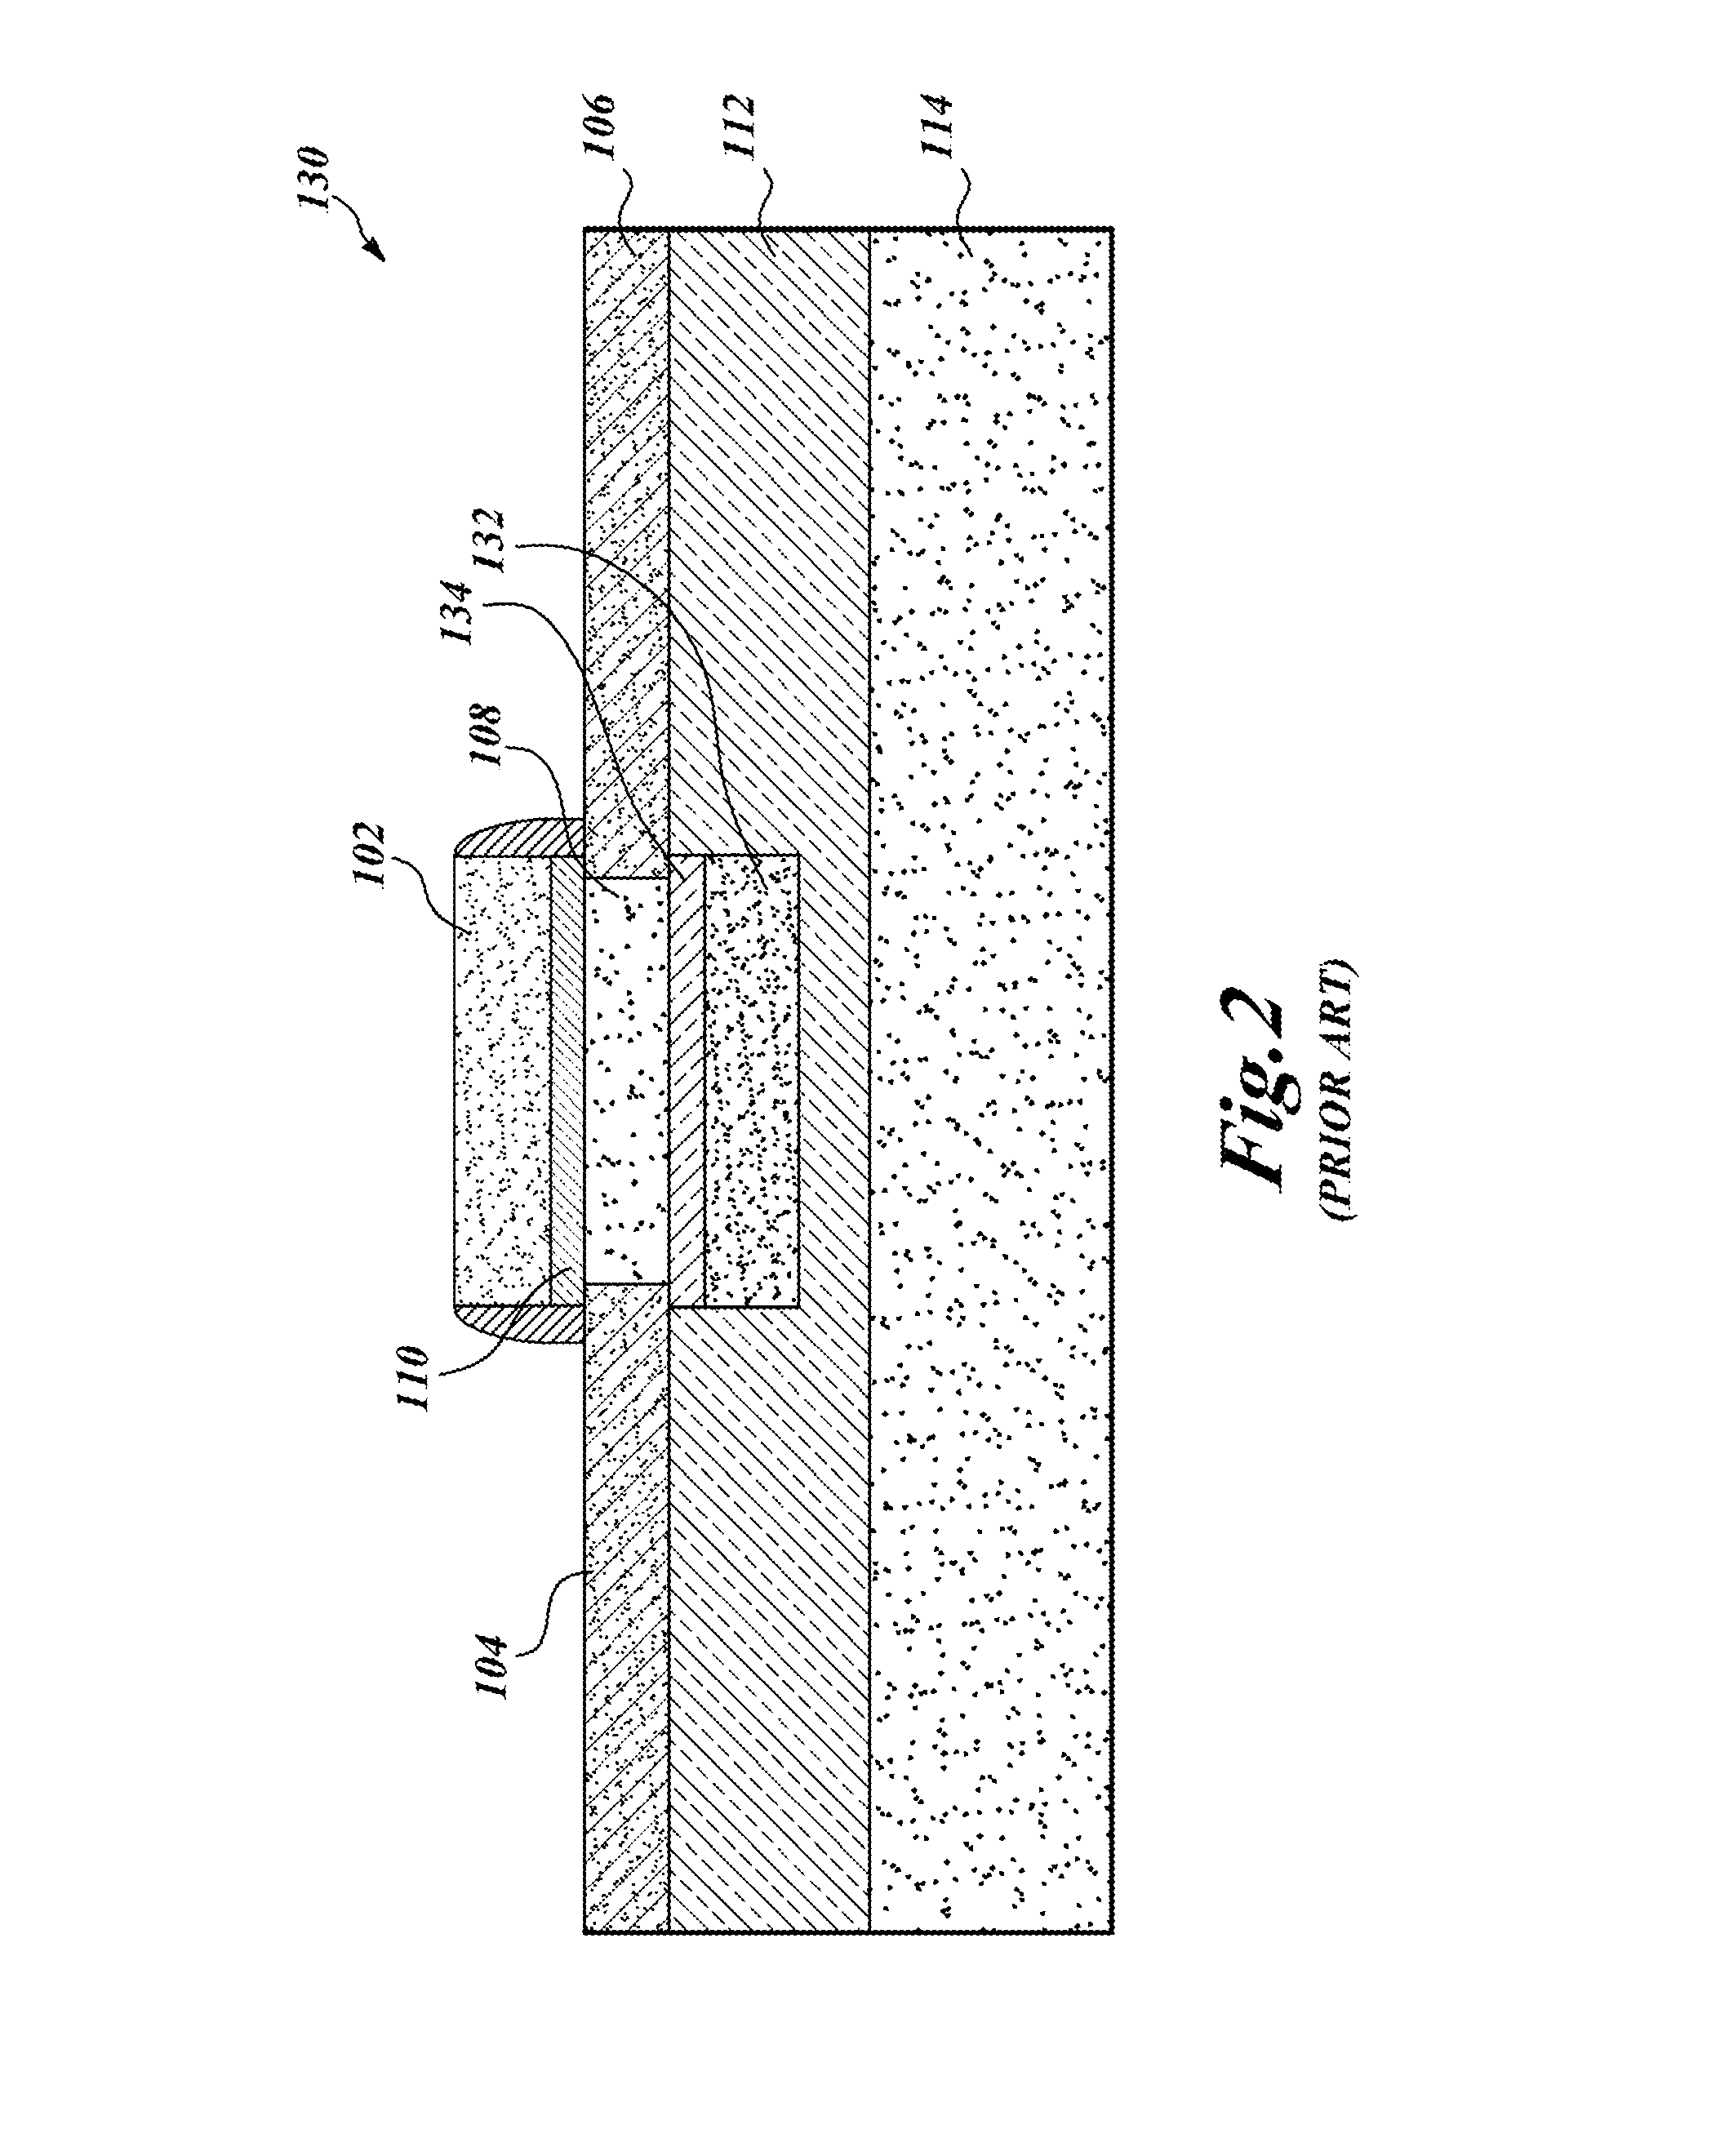 Integrated circuit capacitors for analog microcircuits